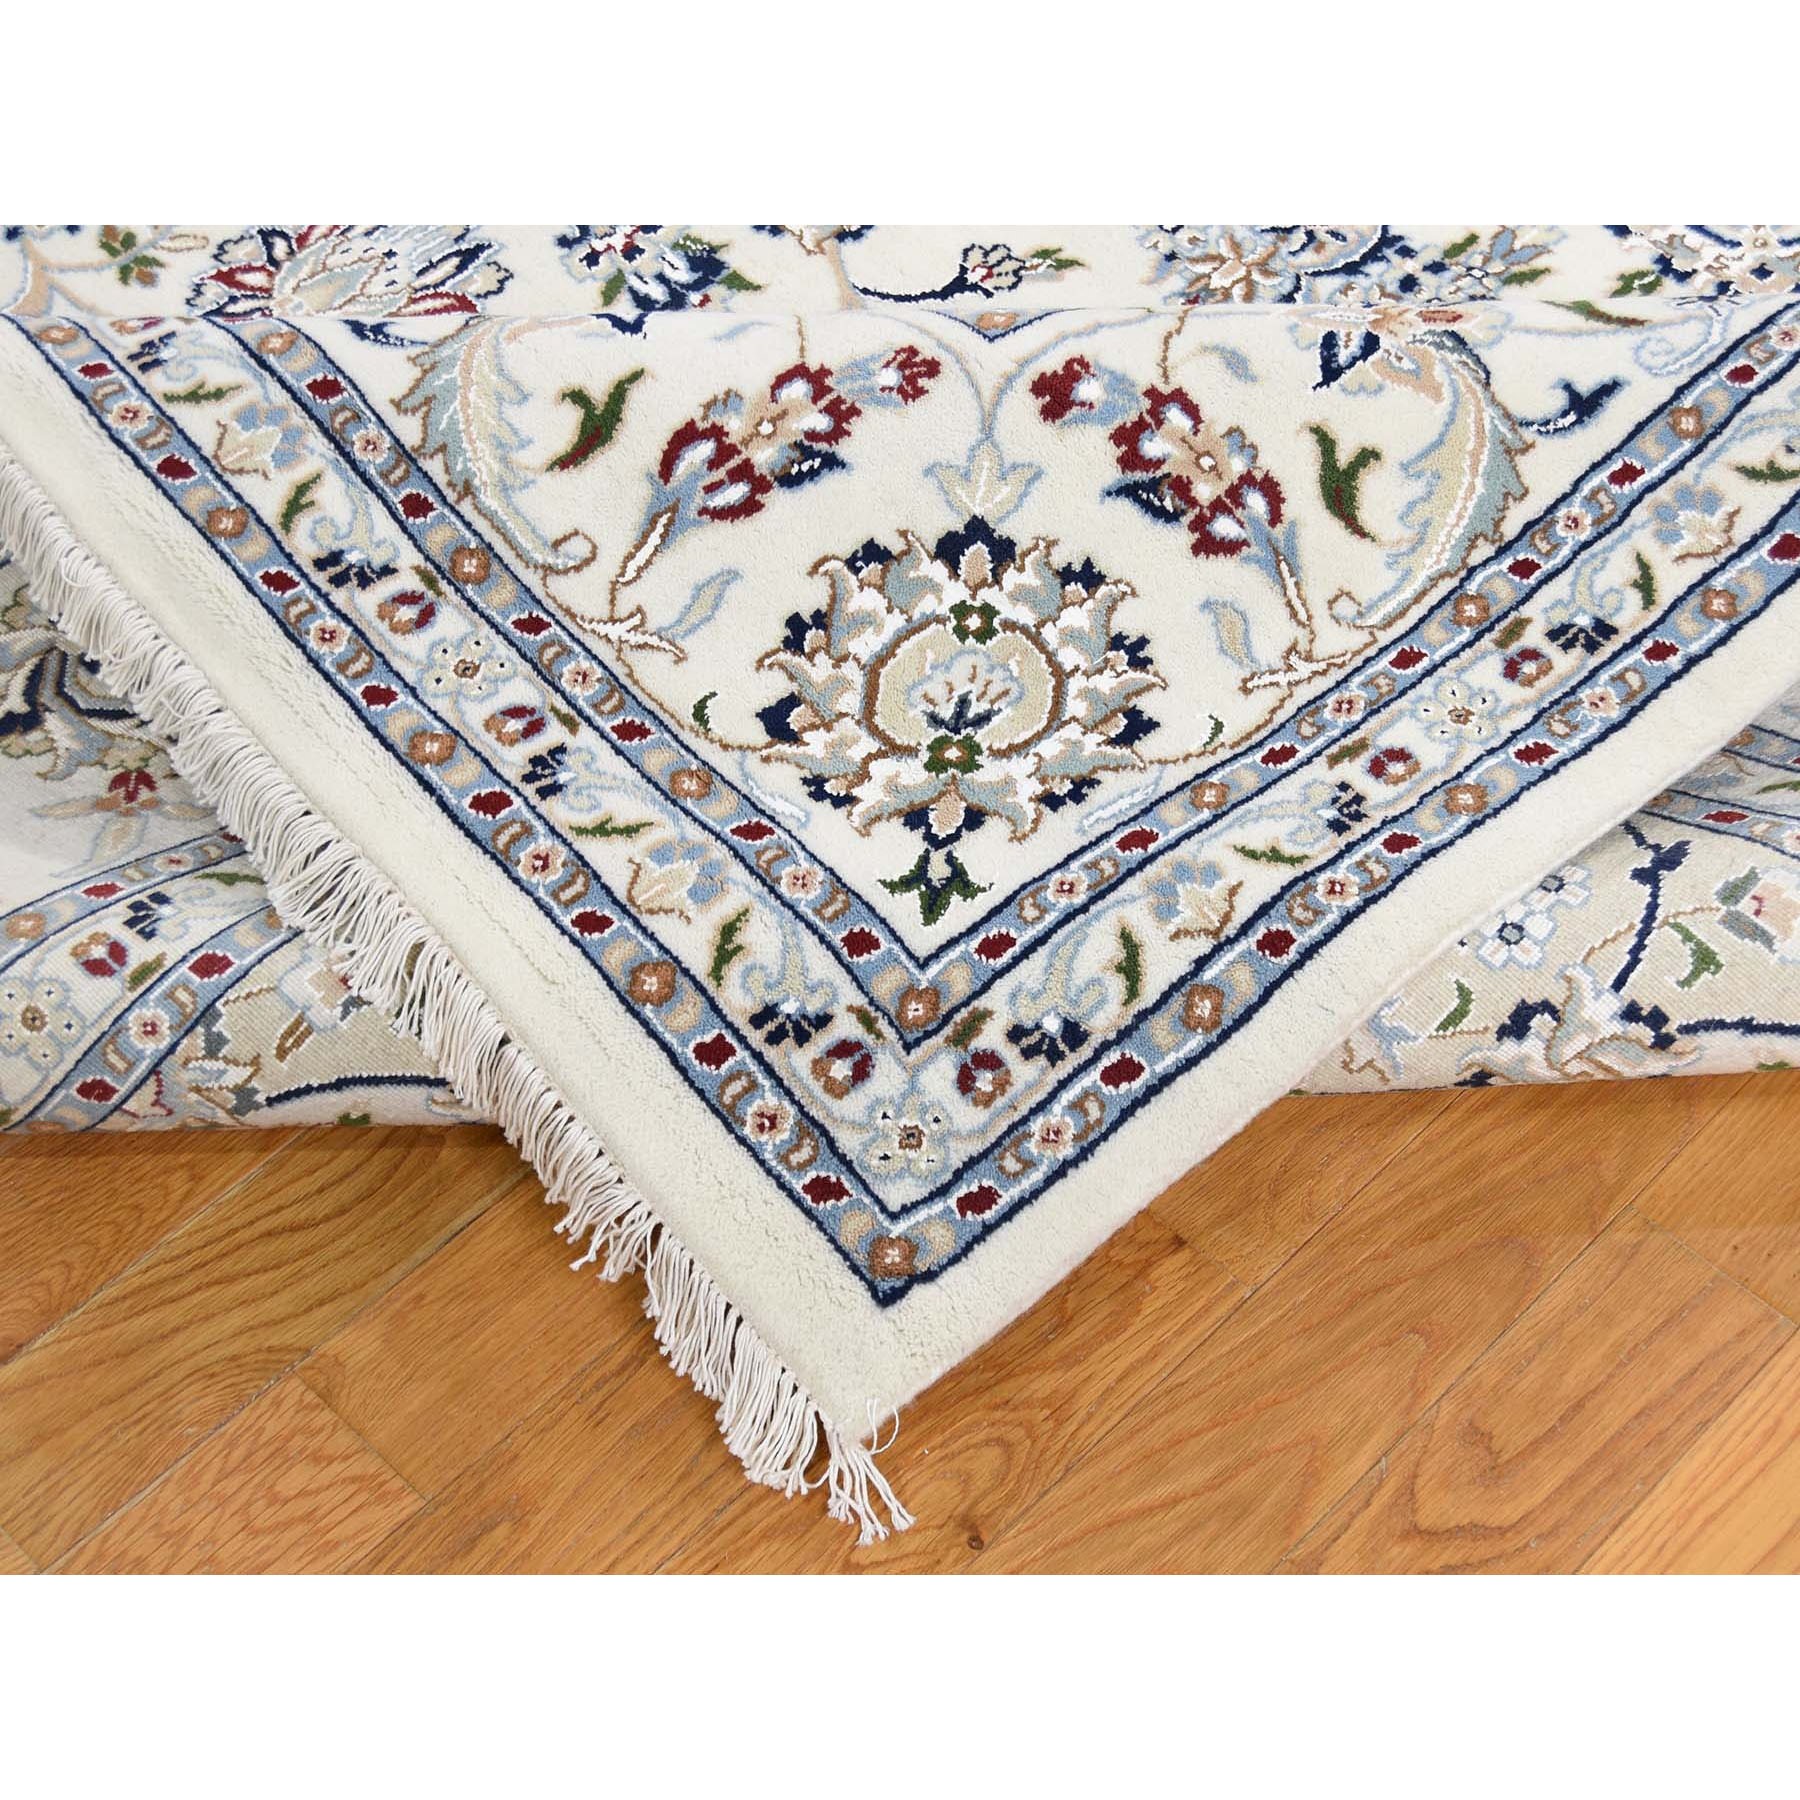 8-10 x12-1  Ivory Wool and Silk 250 KPSI Nain Hand Knotted Oriental Rug 